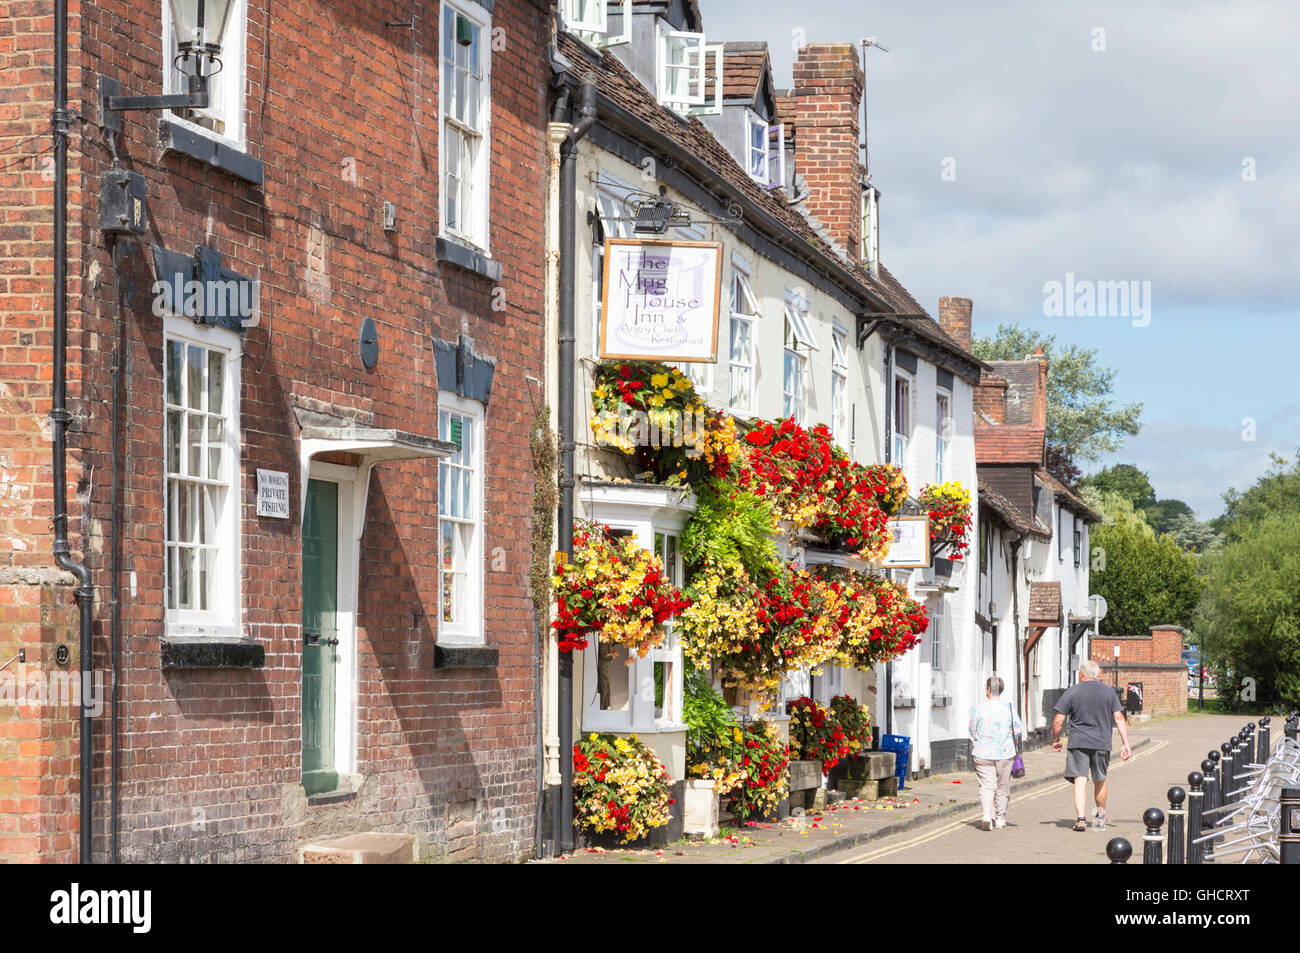 The Mug House Inn in the riverside town of Bewdley, Worcestershire, England, UK Stock Photo